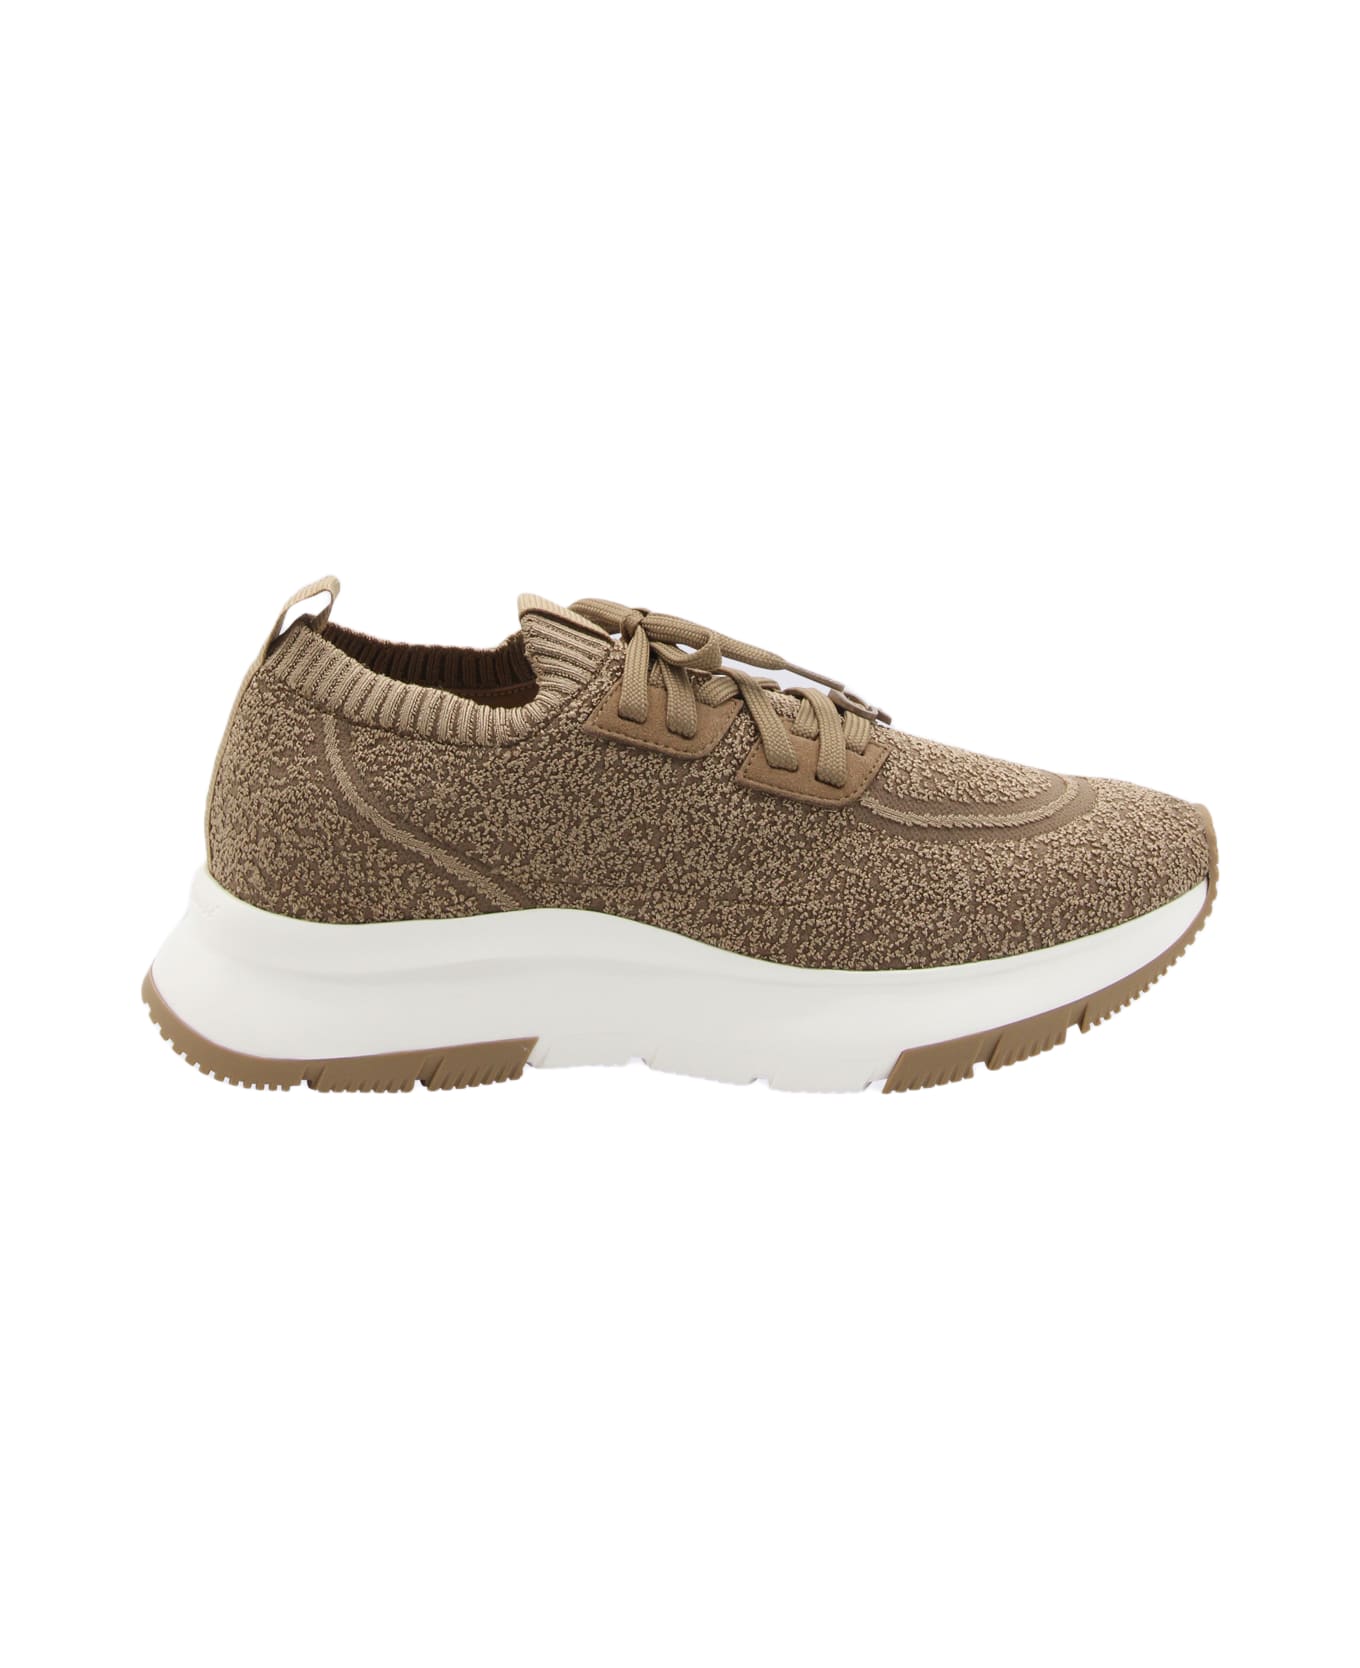 Gianvito Rossi Camel Canvas Sneakers - Brown スニーカー